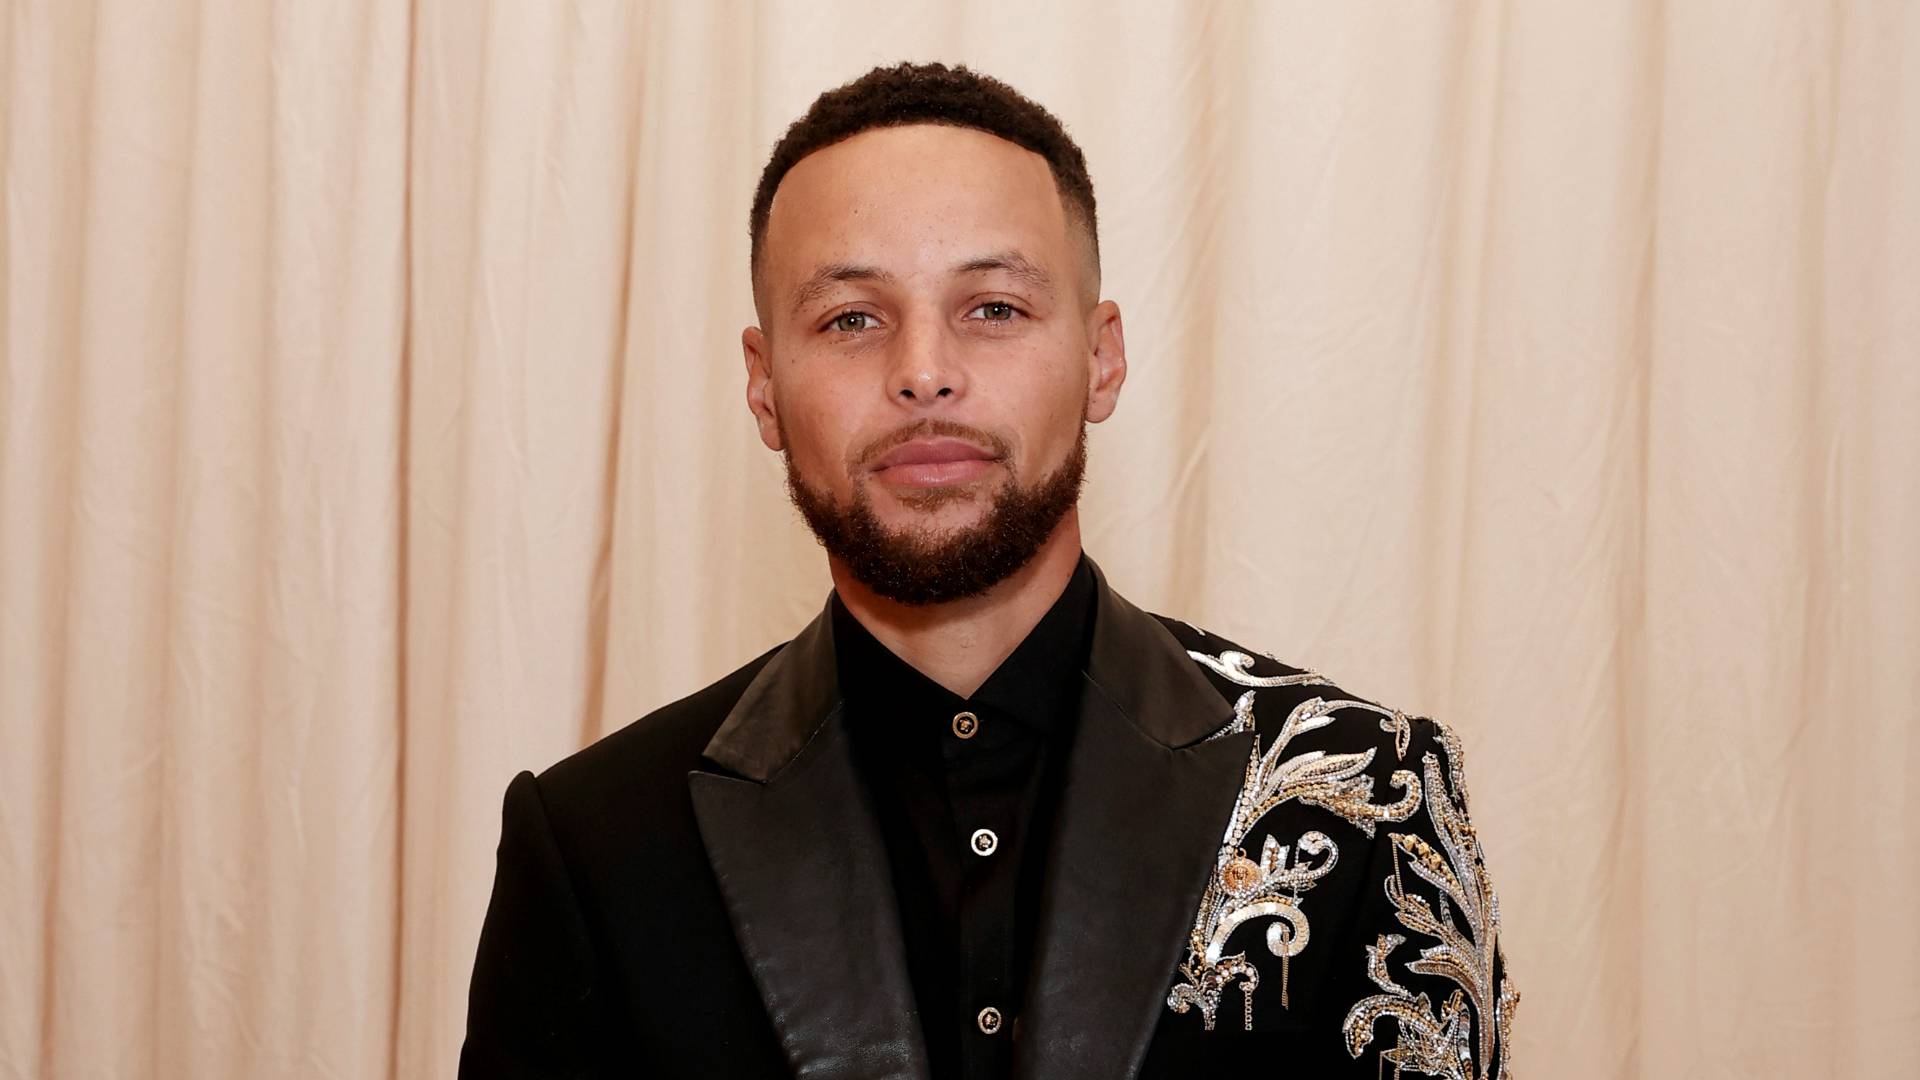 Stephen Curry attends The 2021 Met Gala Celebrating In America: A Lexicon Of Fashion at Metropolitan Museum of Art on September 13, 2021 in New York City. 